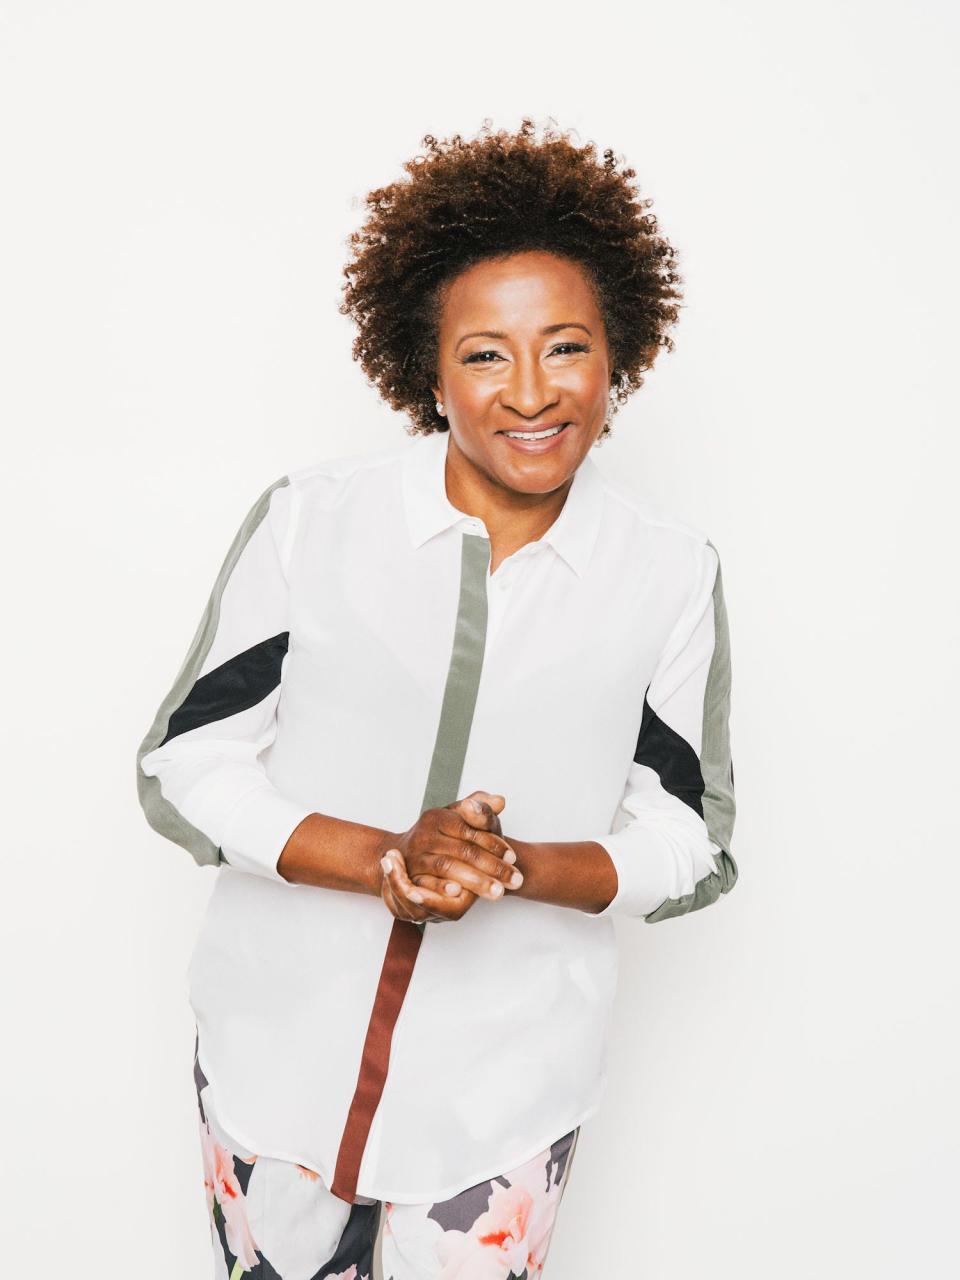 Wanda Sykes performs at the CFCC Wilson Center in Wilmington Jan. 27.